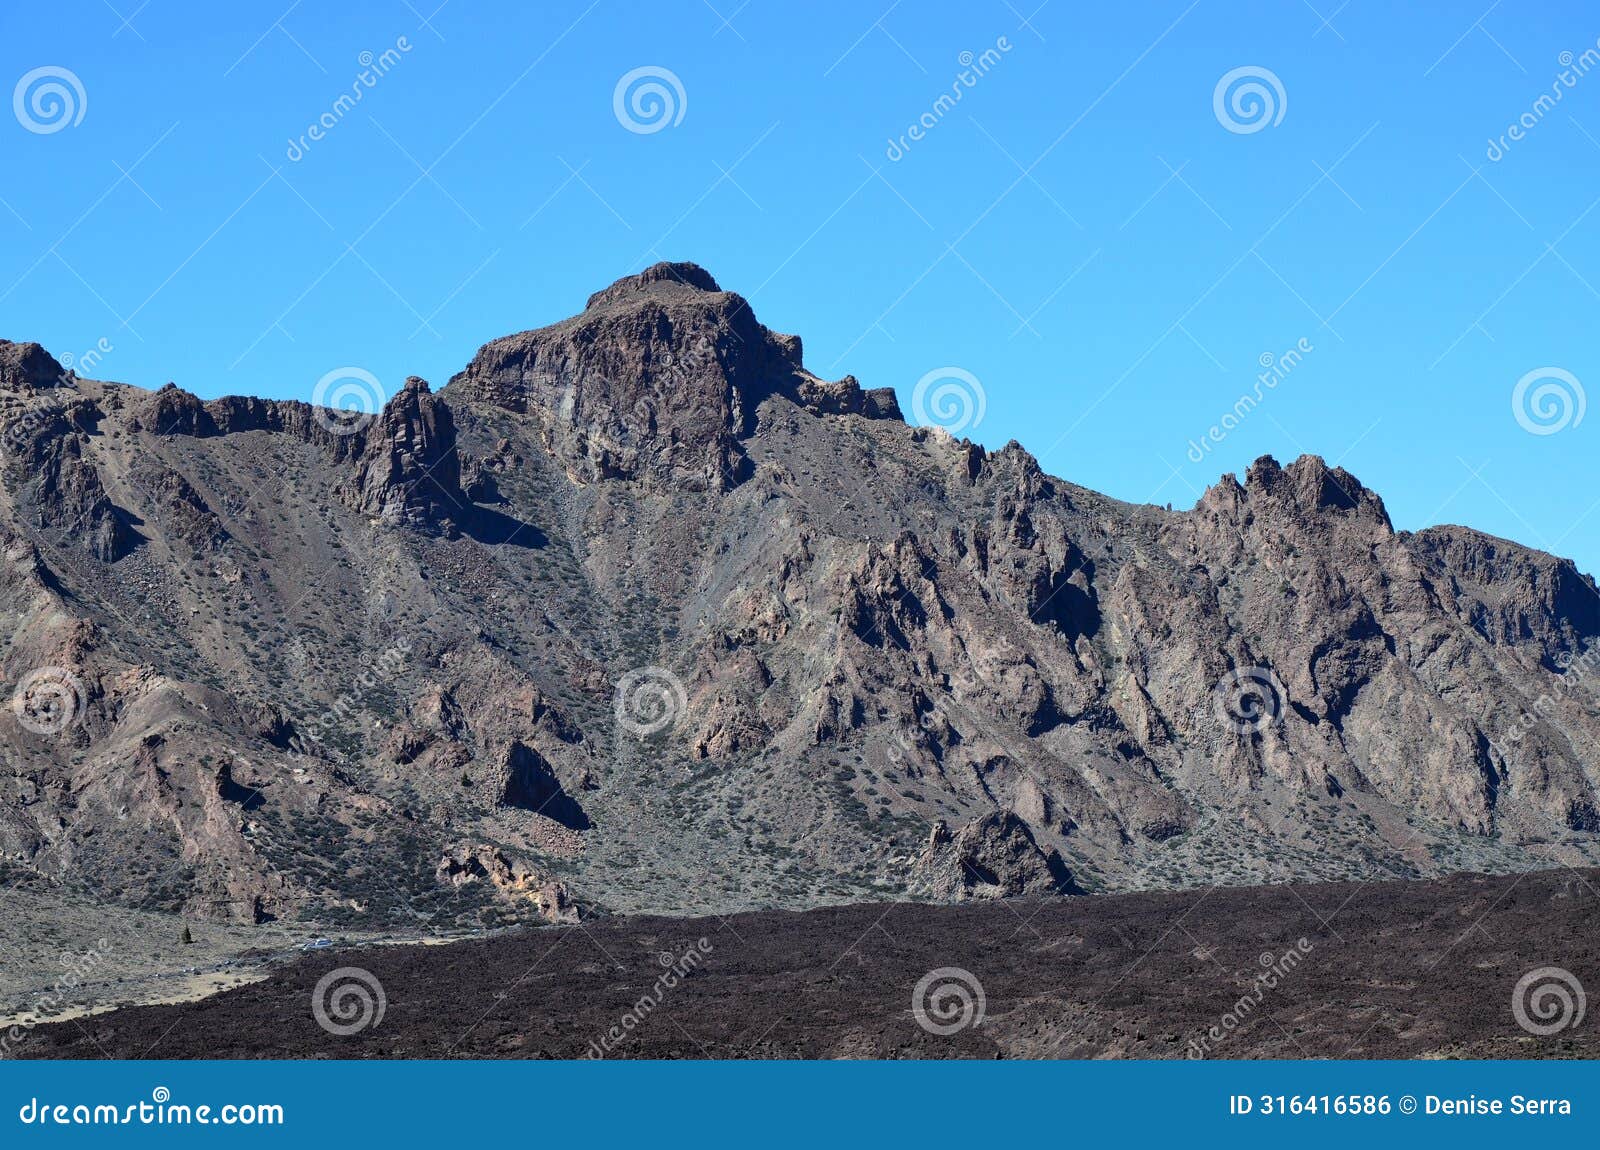 scenic view of volcanic rock formations in desert during sunny day, teide national park, tenerife